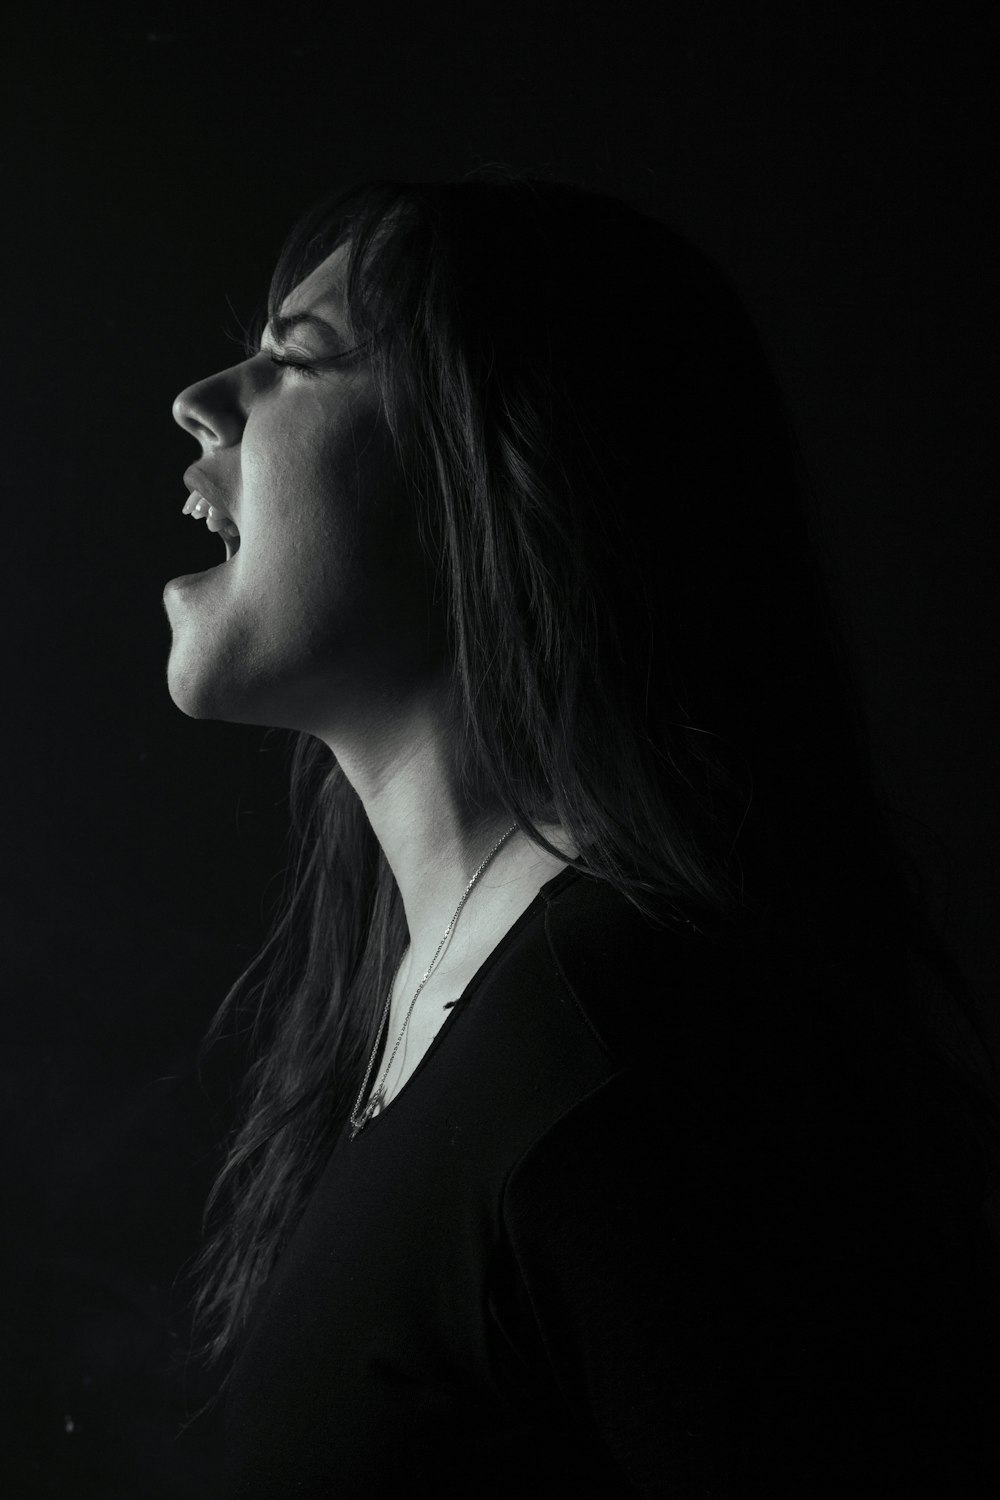 a woman singing into a microphone in the dark